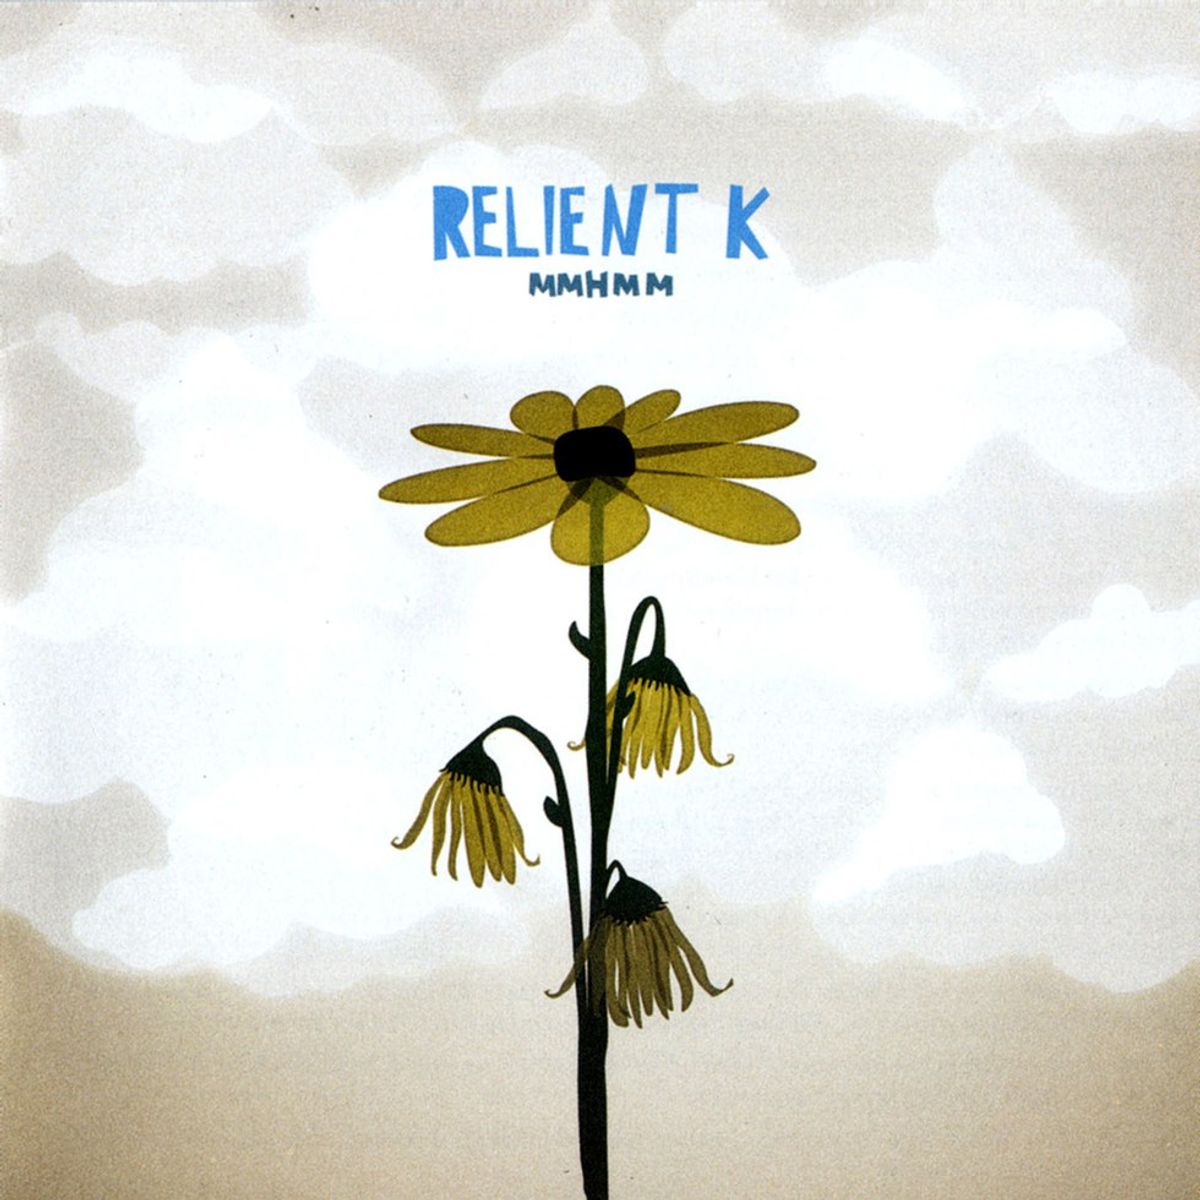 Why Relient K's "Mmhmm" Is One Of The Most Real Christian Punk Albums